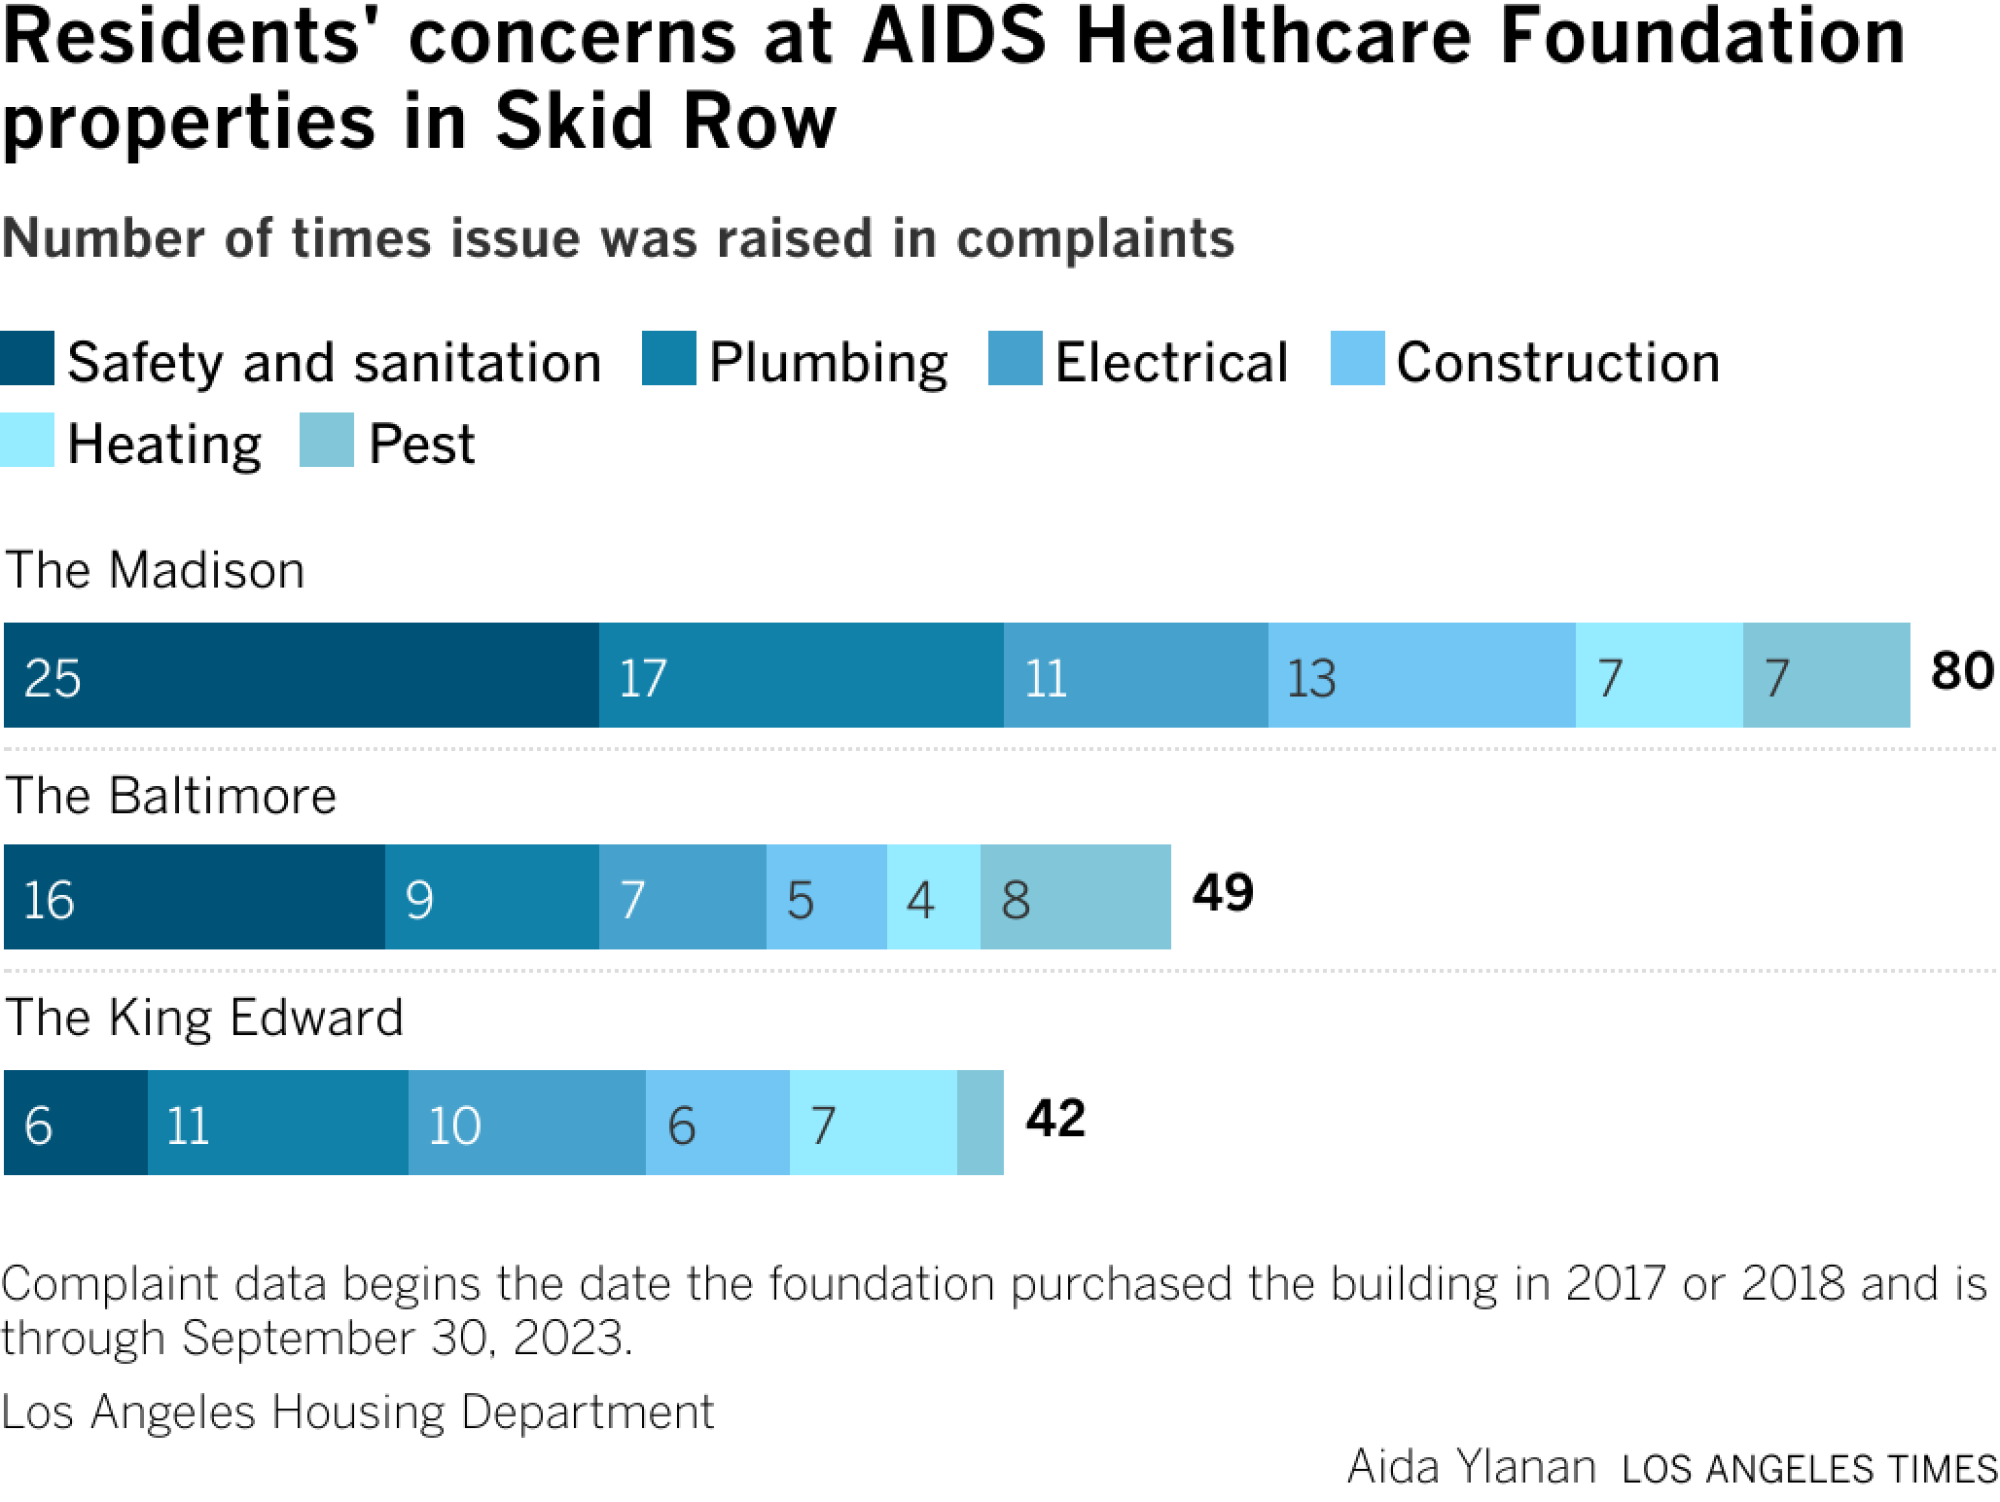 Residents' concerns at AIDS Healthcare Foundation properties in Skid Row